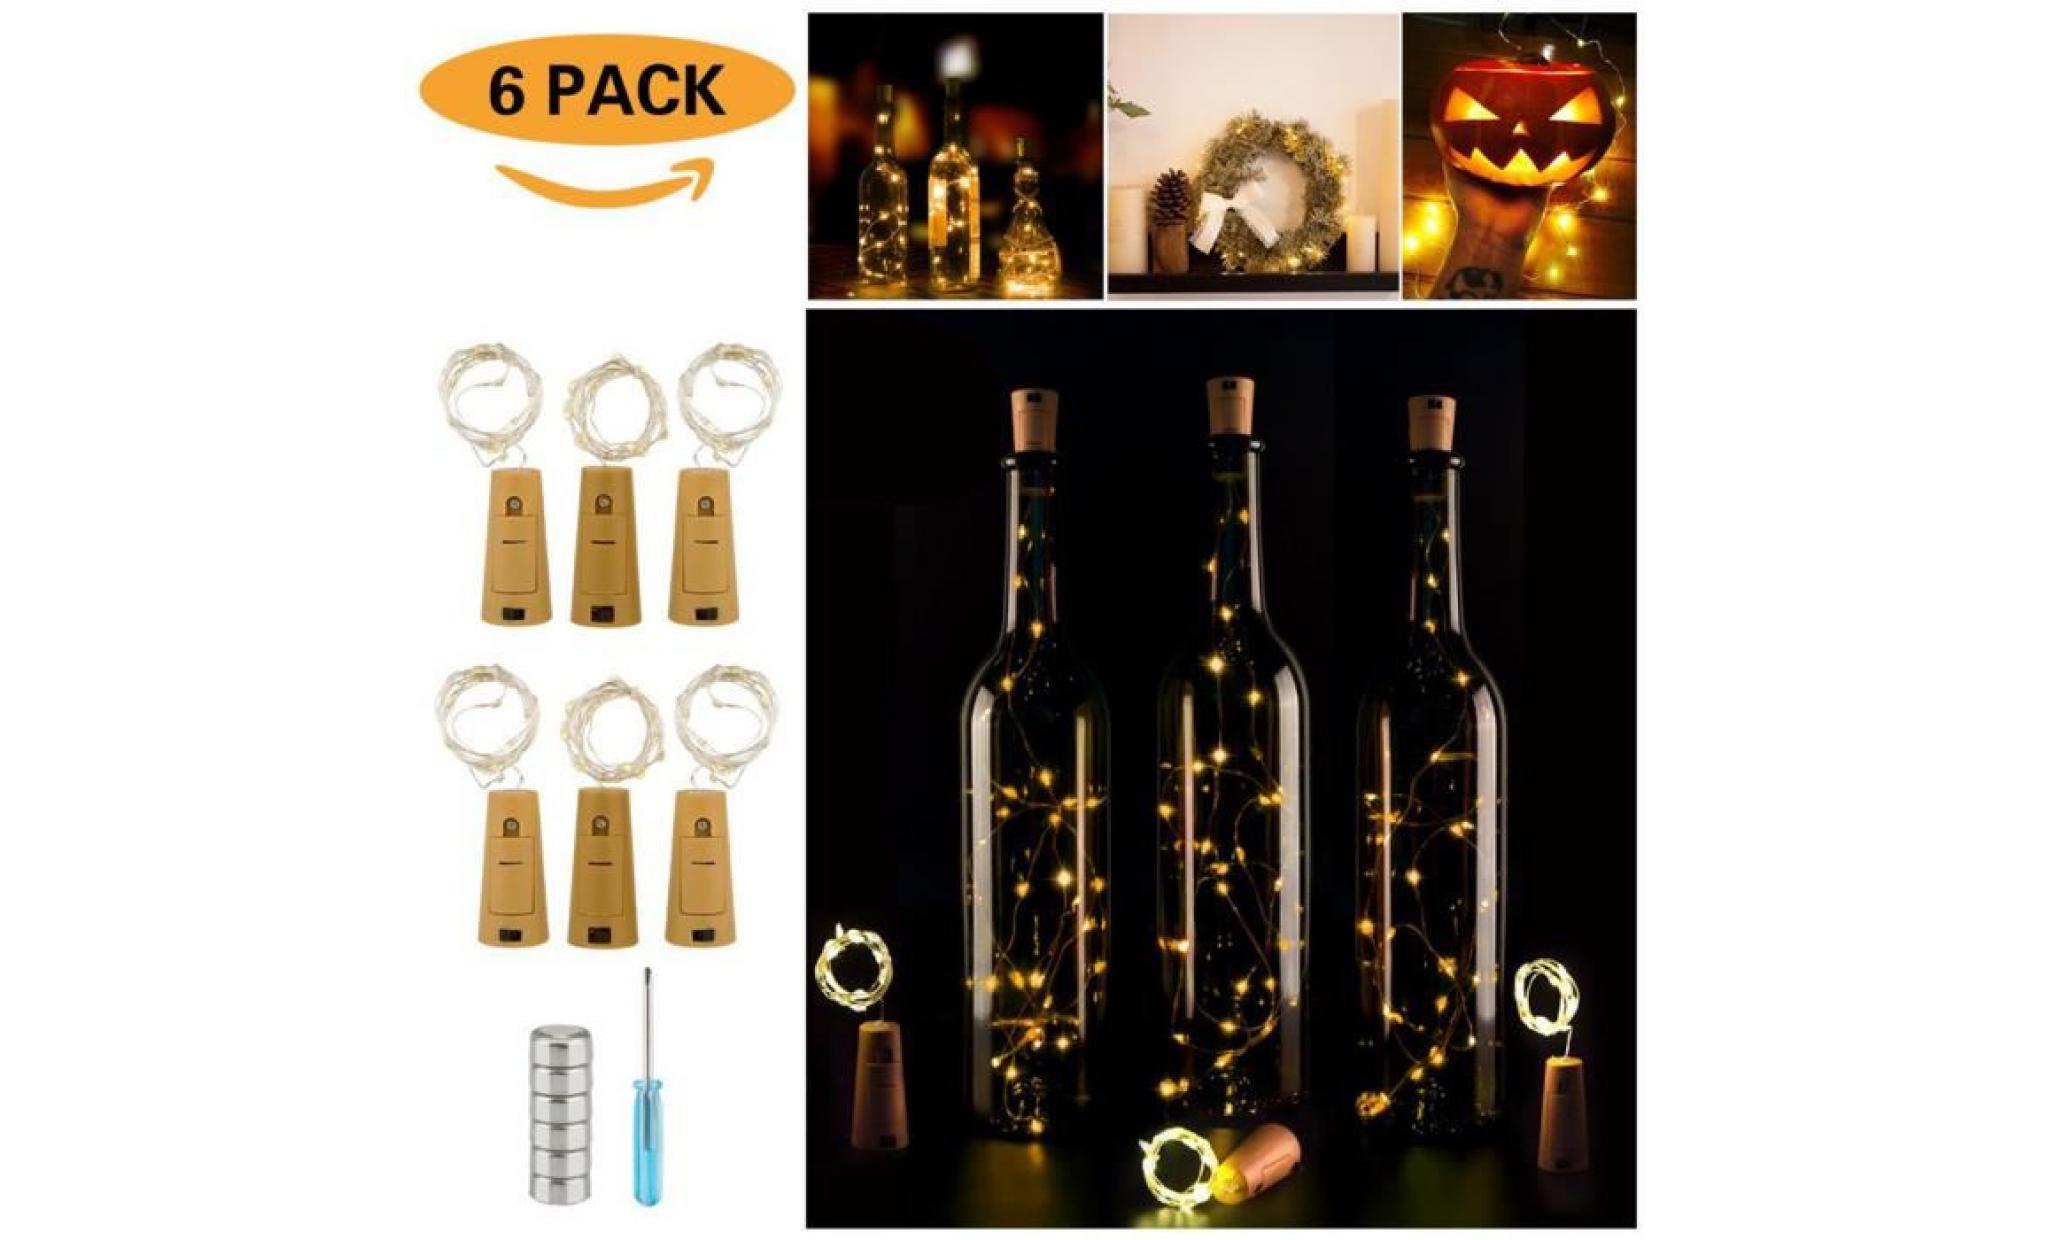 cork shaped 15 led night light starry lights wine bottle lamp for party colorful qinhig1581 pas cher